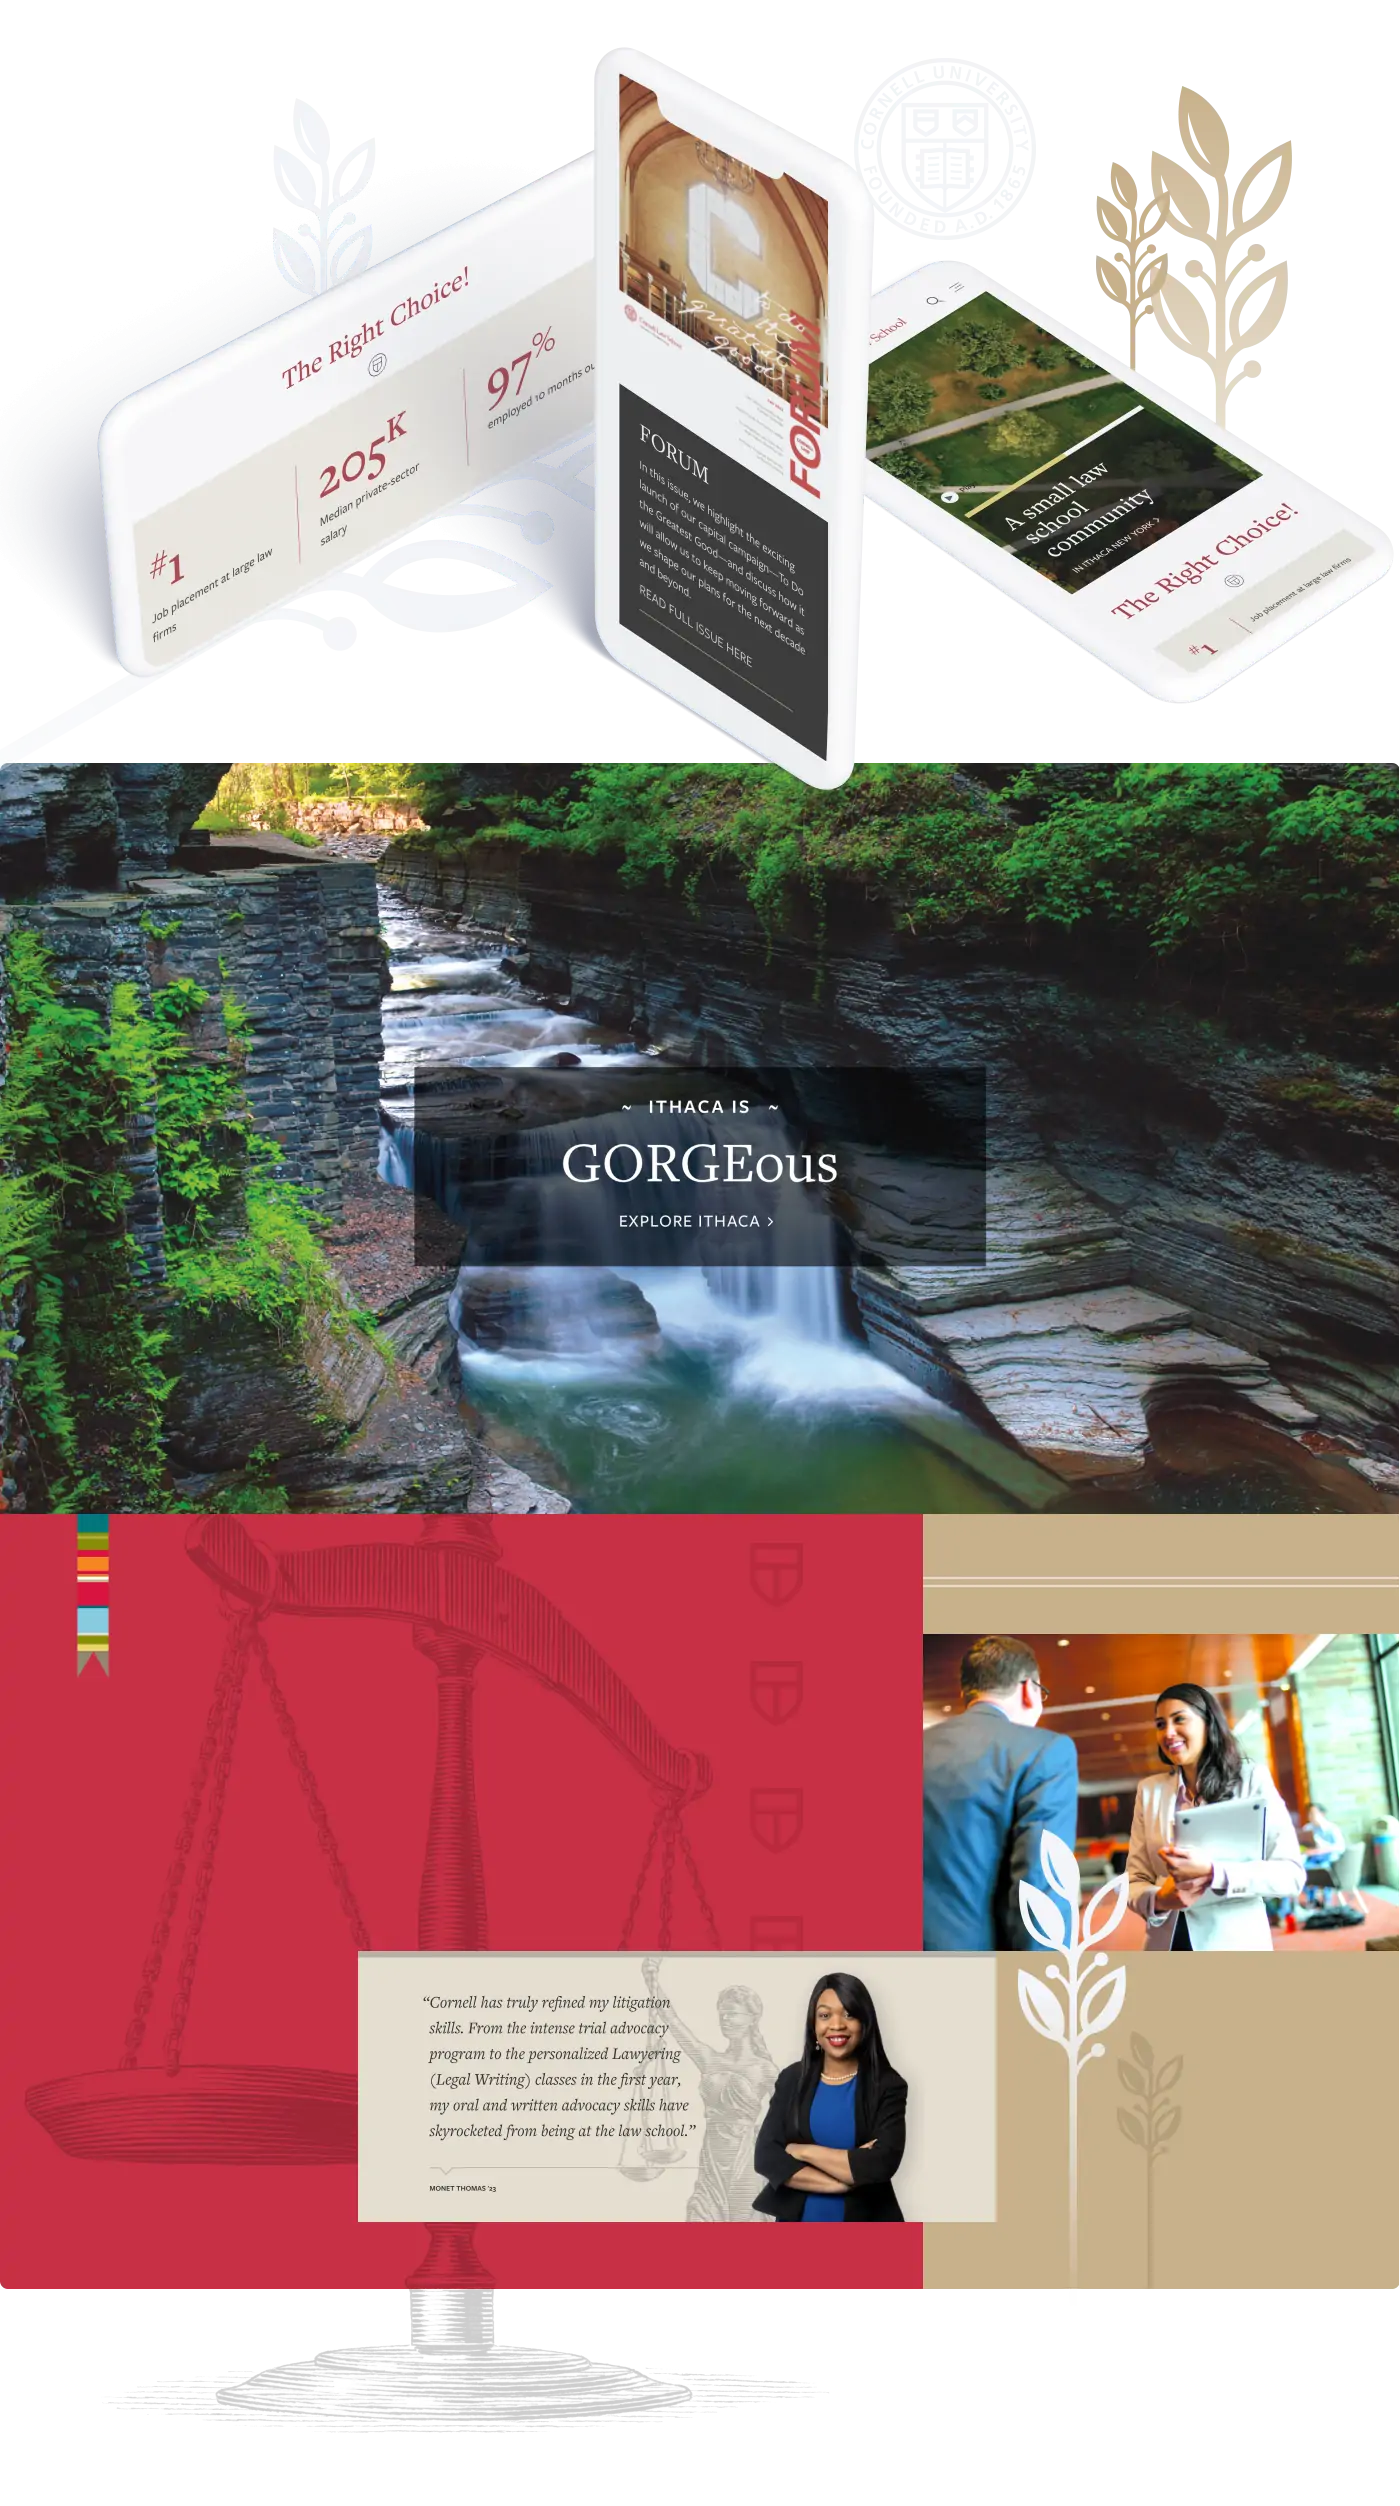 examples of Cornell Law's components on three different mobile screens, a photo of the gorge that said Ithaca is GORGEous, and quotes from an alumna with the scales of justice